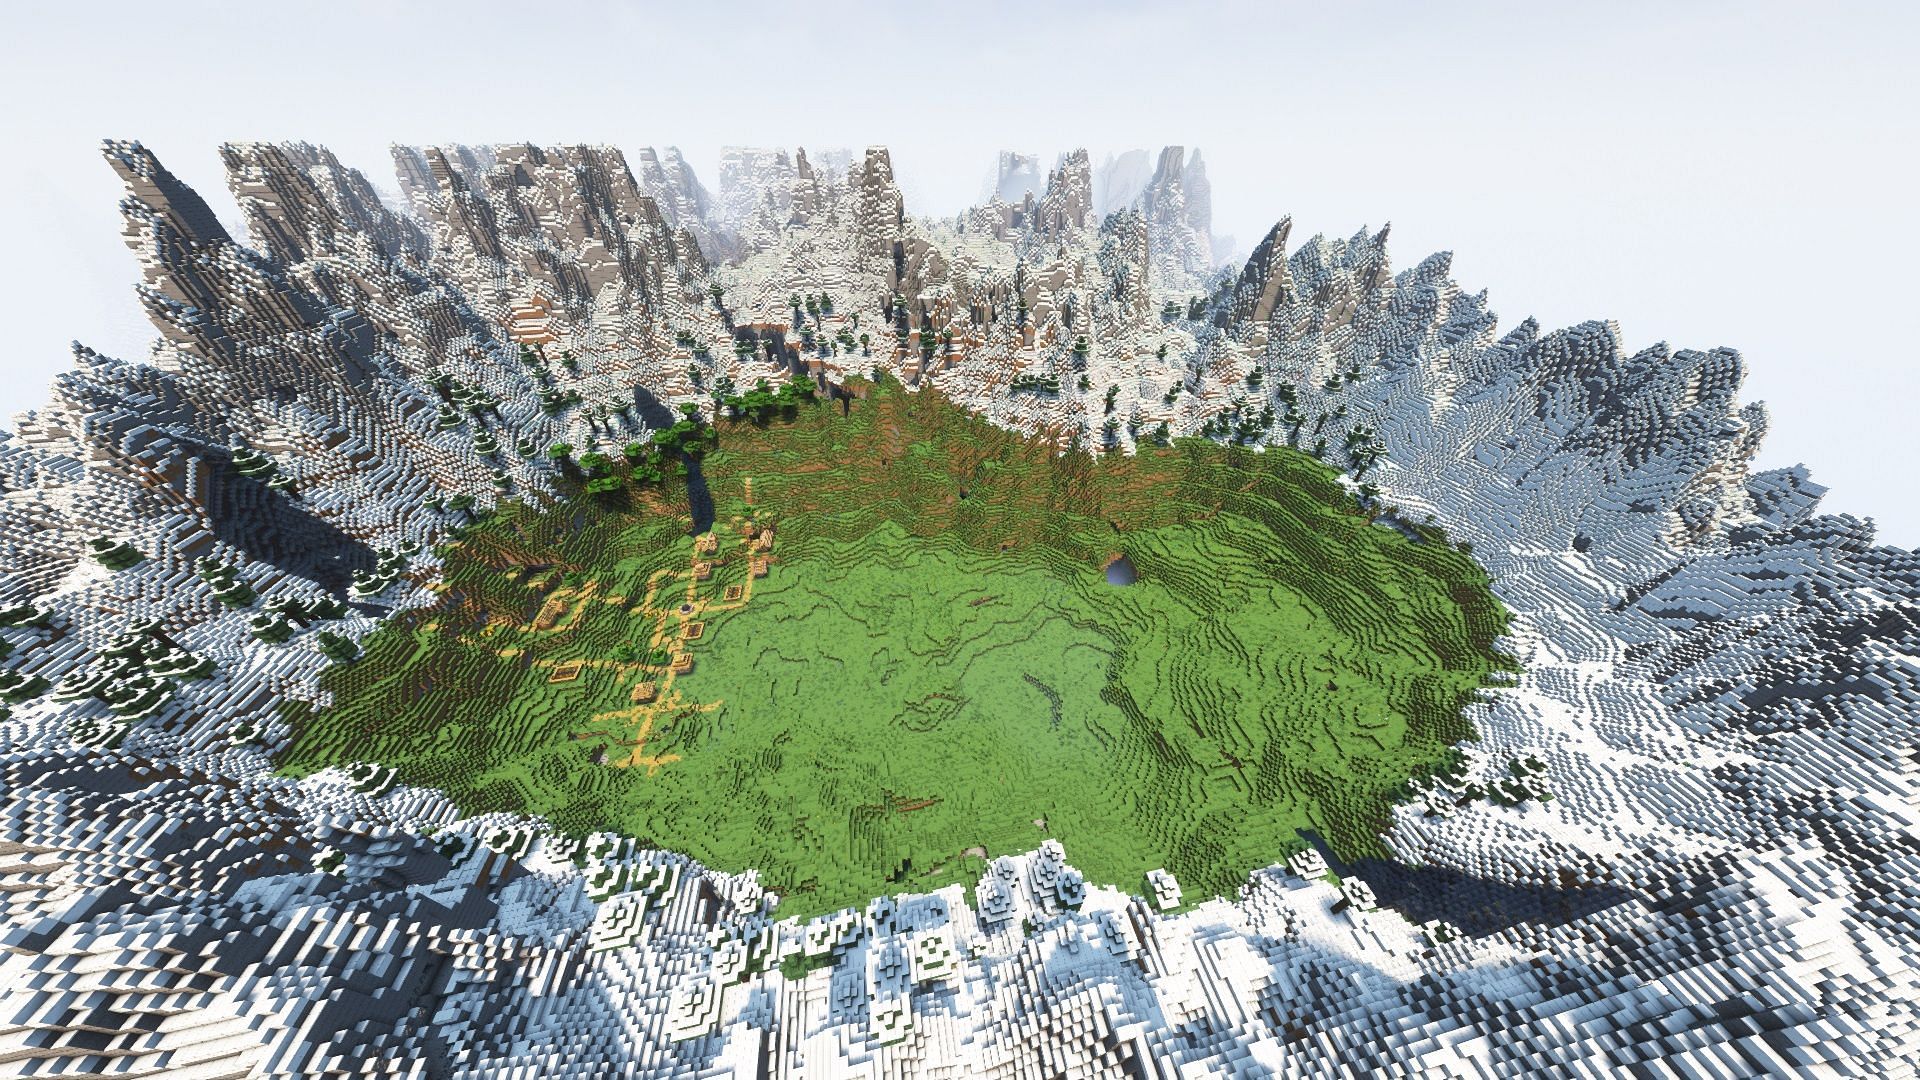 A plains village surrounded by mountains (Image via Mojang)